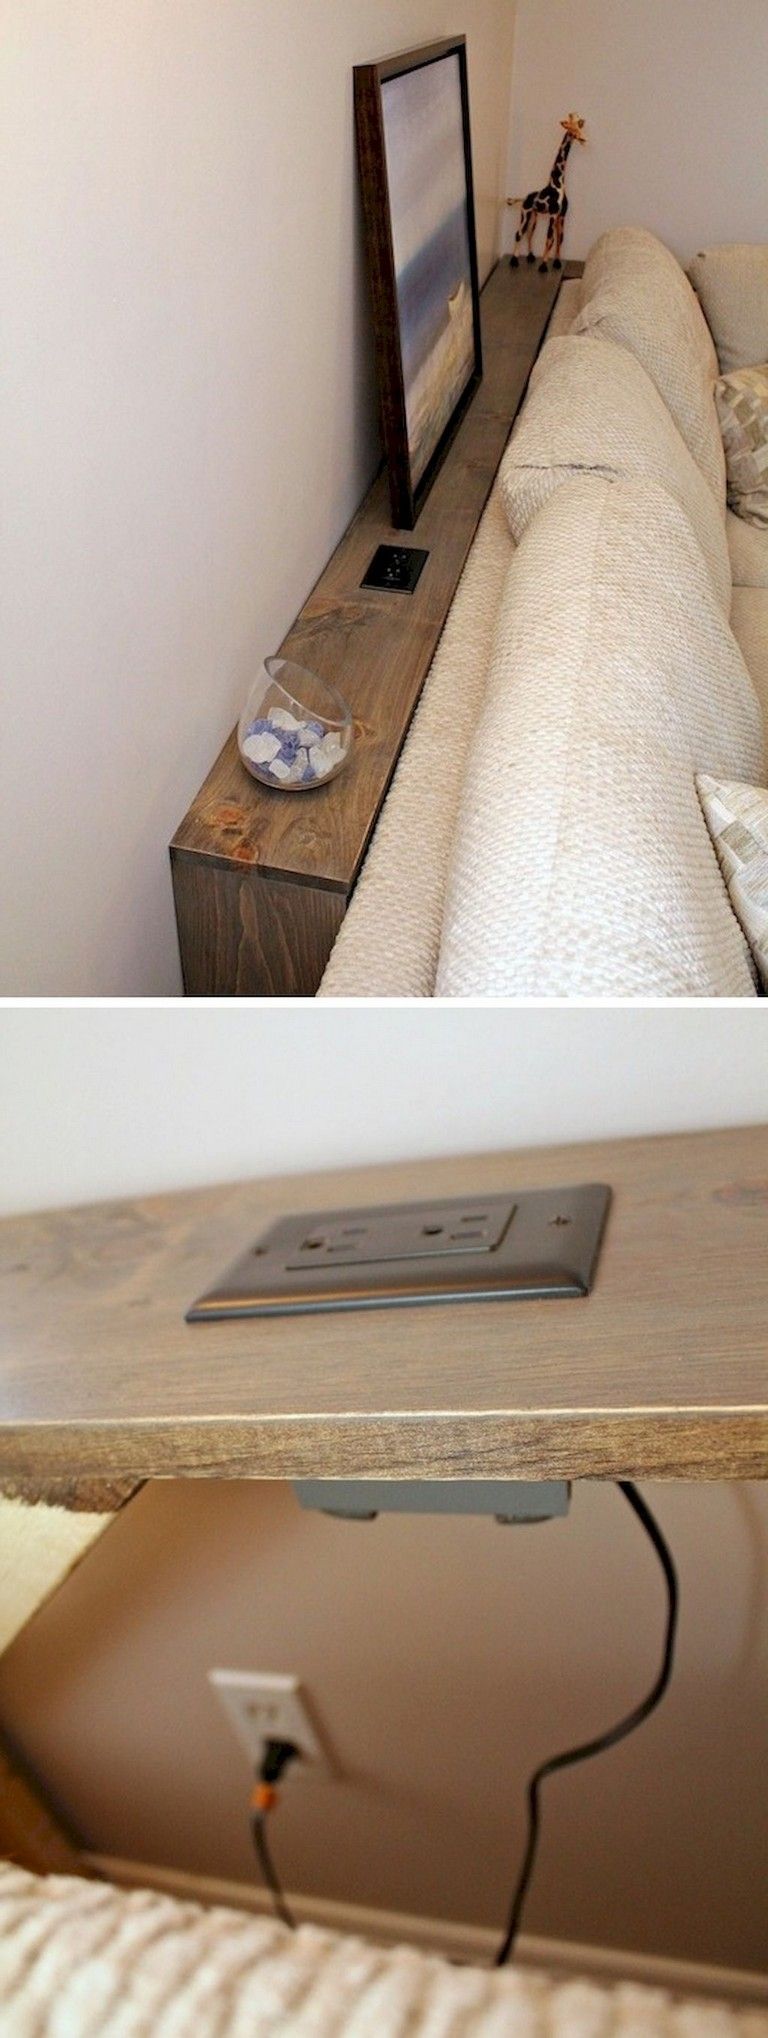 94+ Brilliant First Apartment Decorating Ideas on A Budget - Page 44 of 95 -   14 diy projects Apartment budget ideas